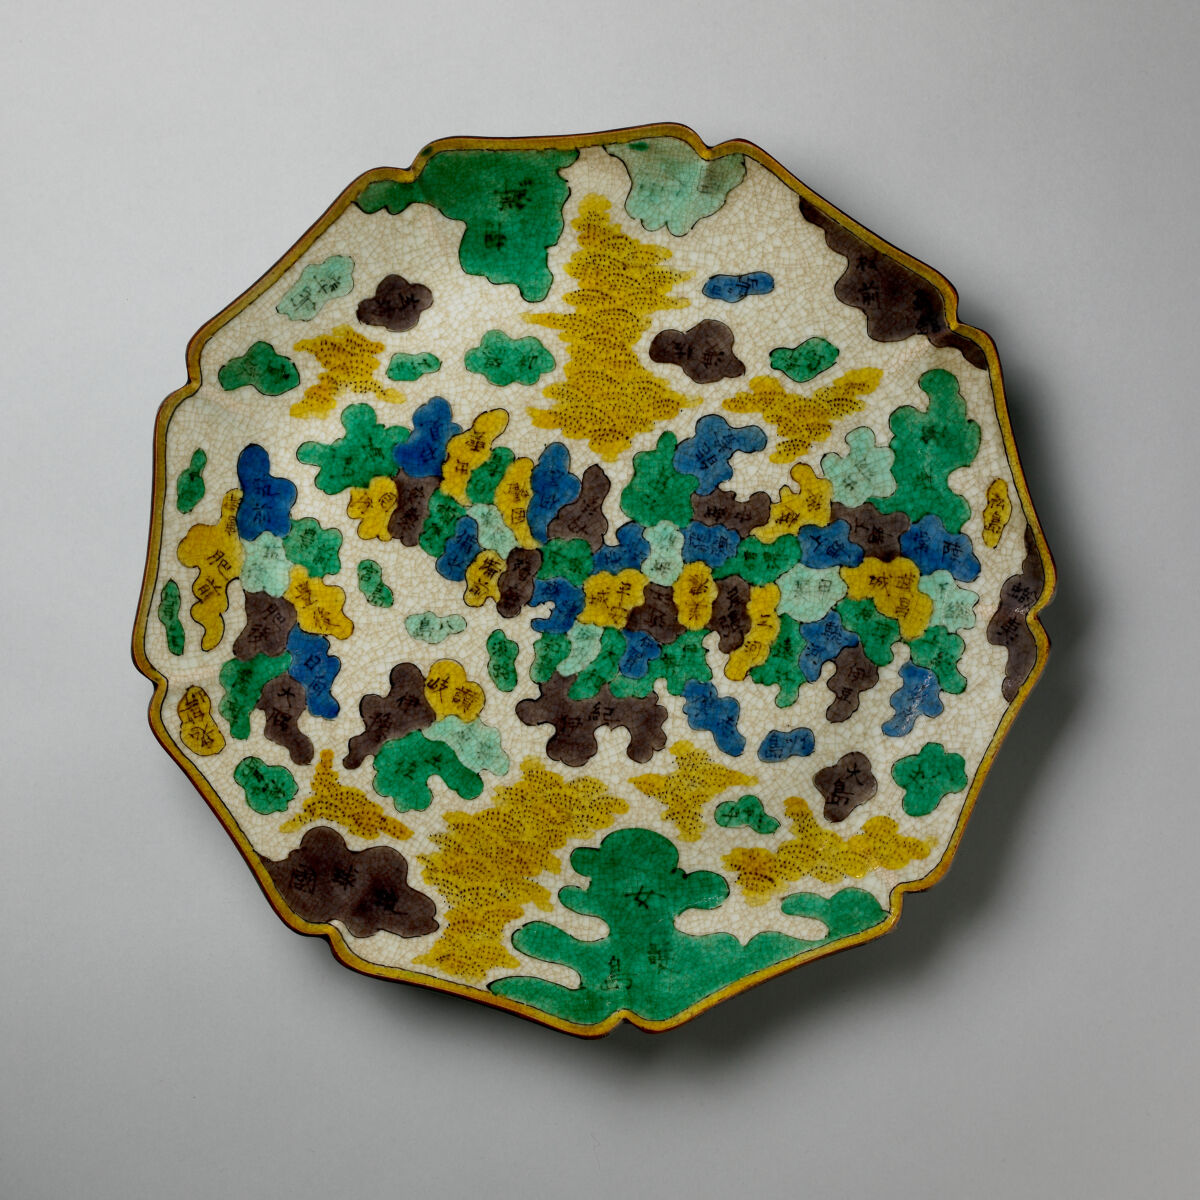 Enameled ceramic map plate, ca. 1800–1850. MacLean Collection, MC29791